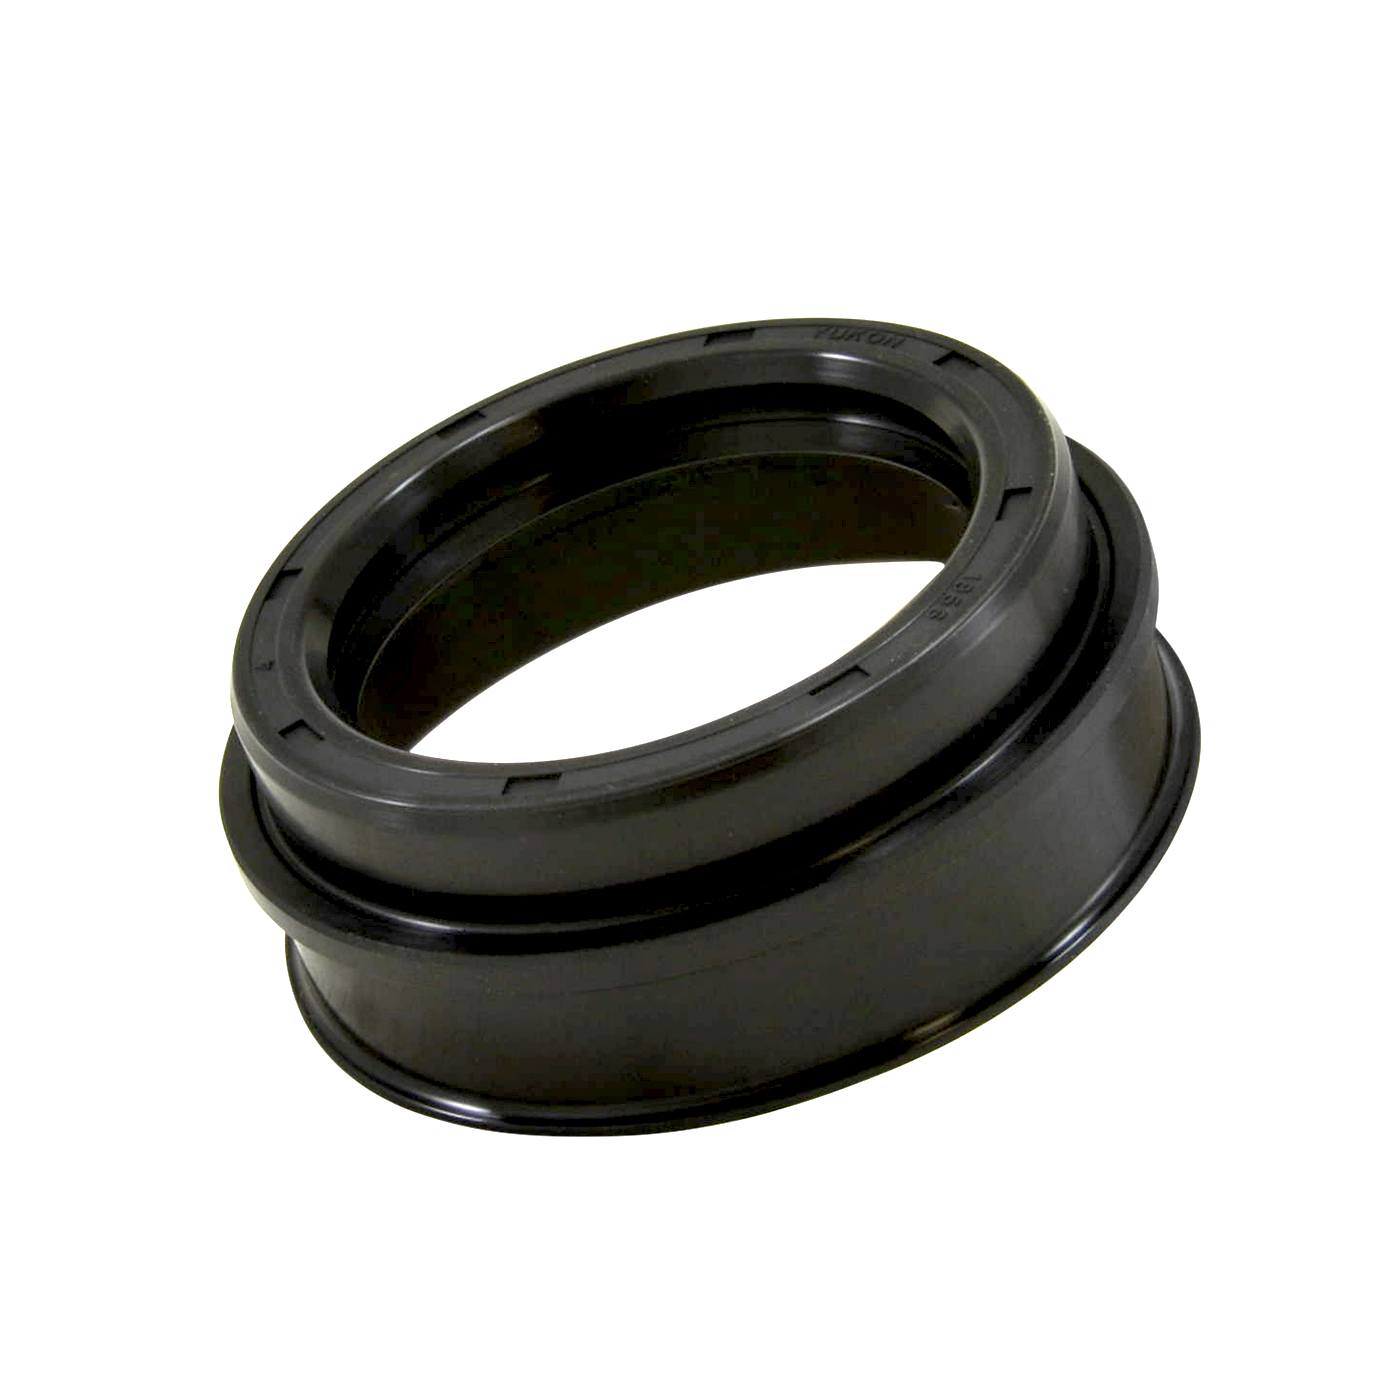 Outer axle seal for Toyota 7.5", 8" & V6 rear 